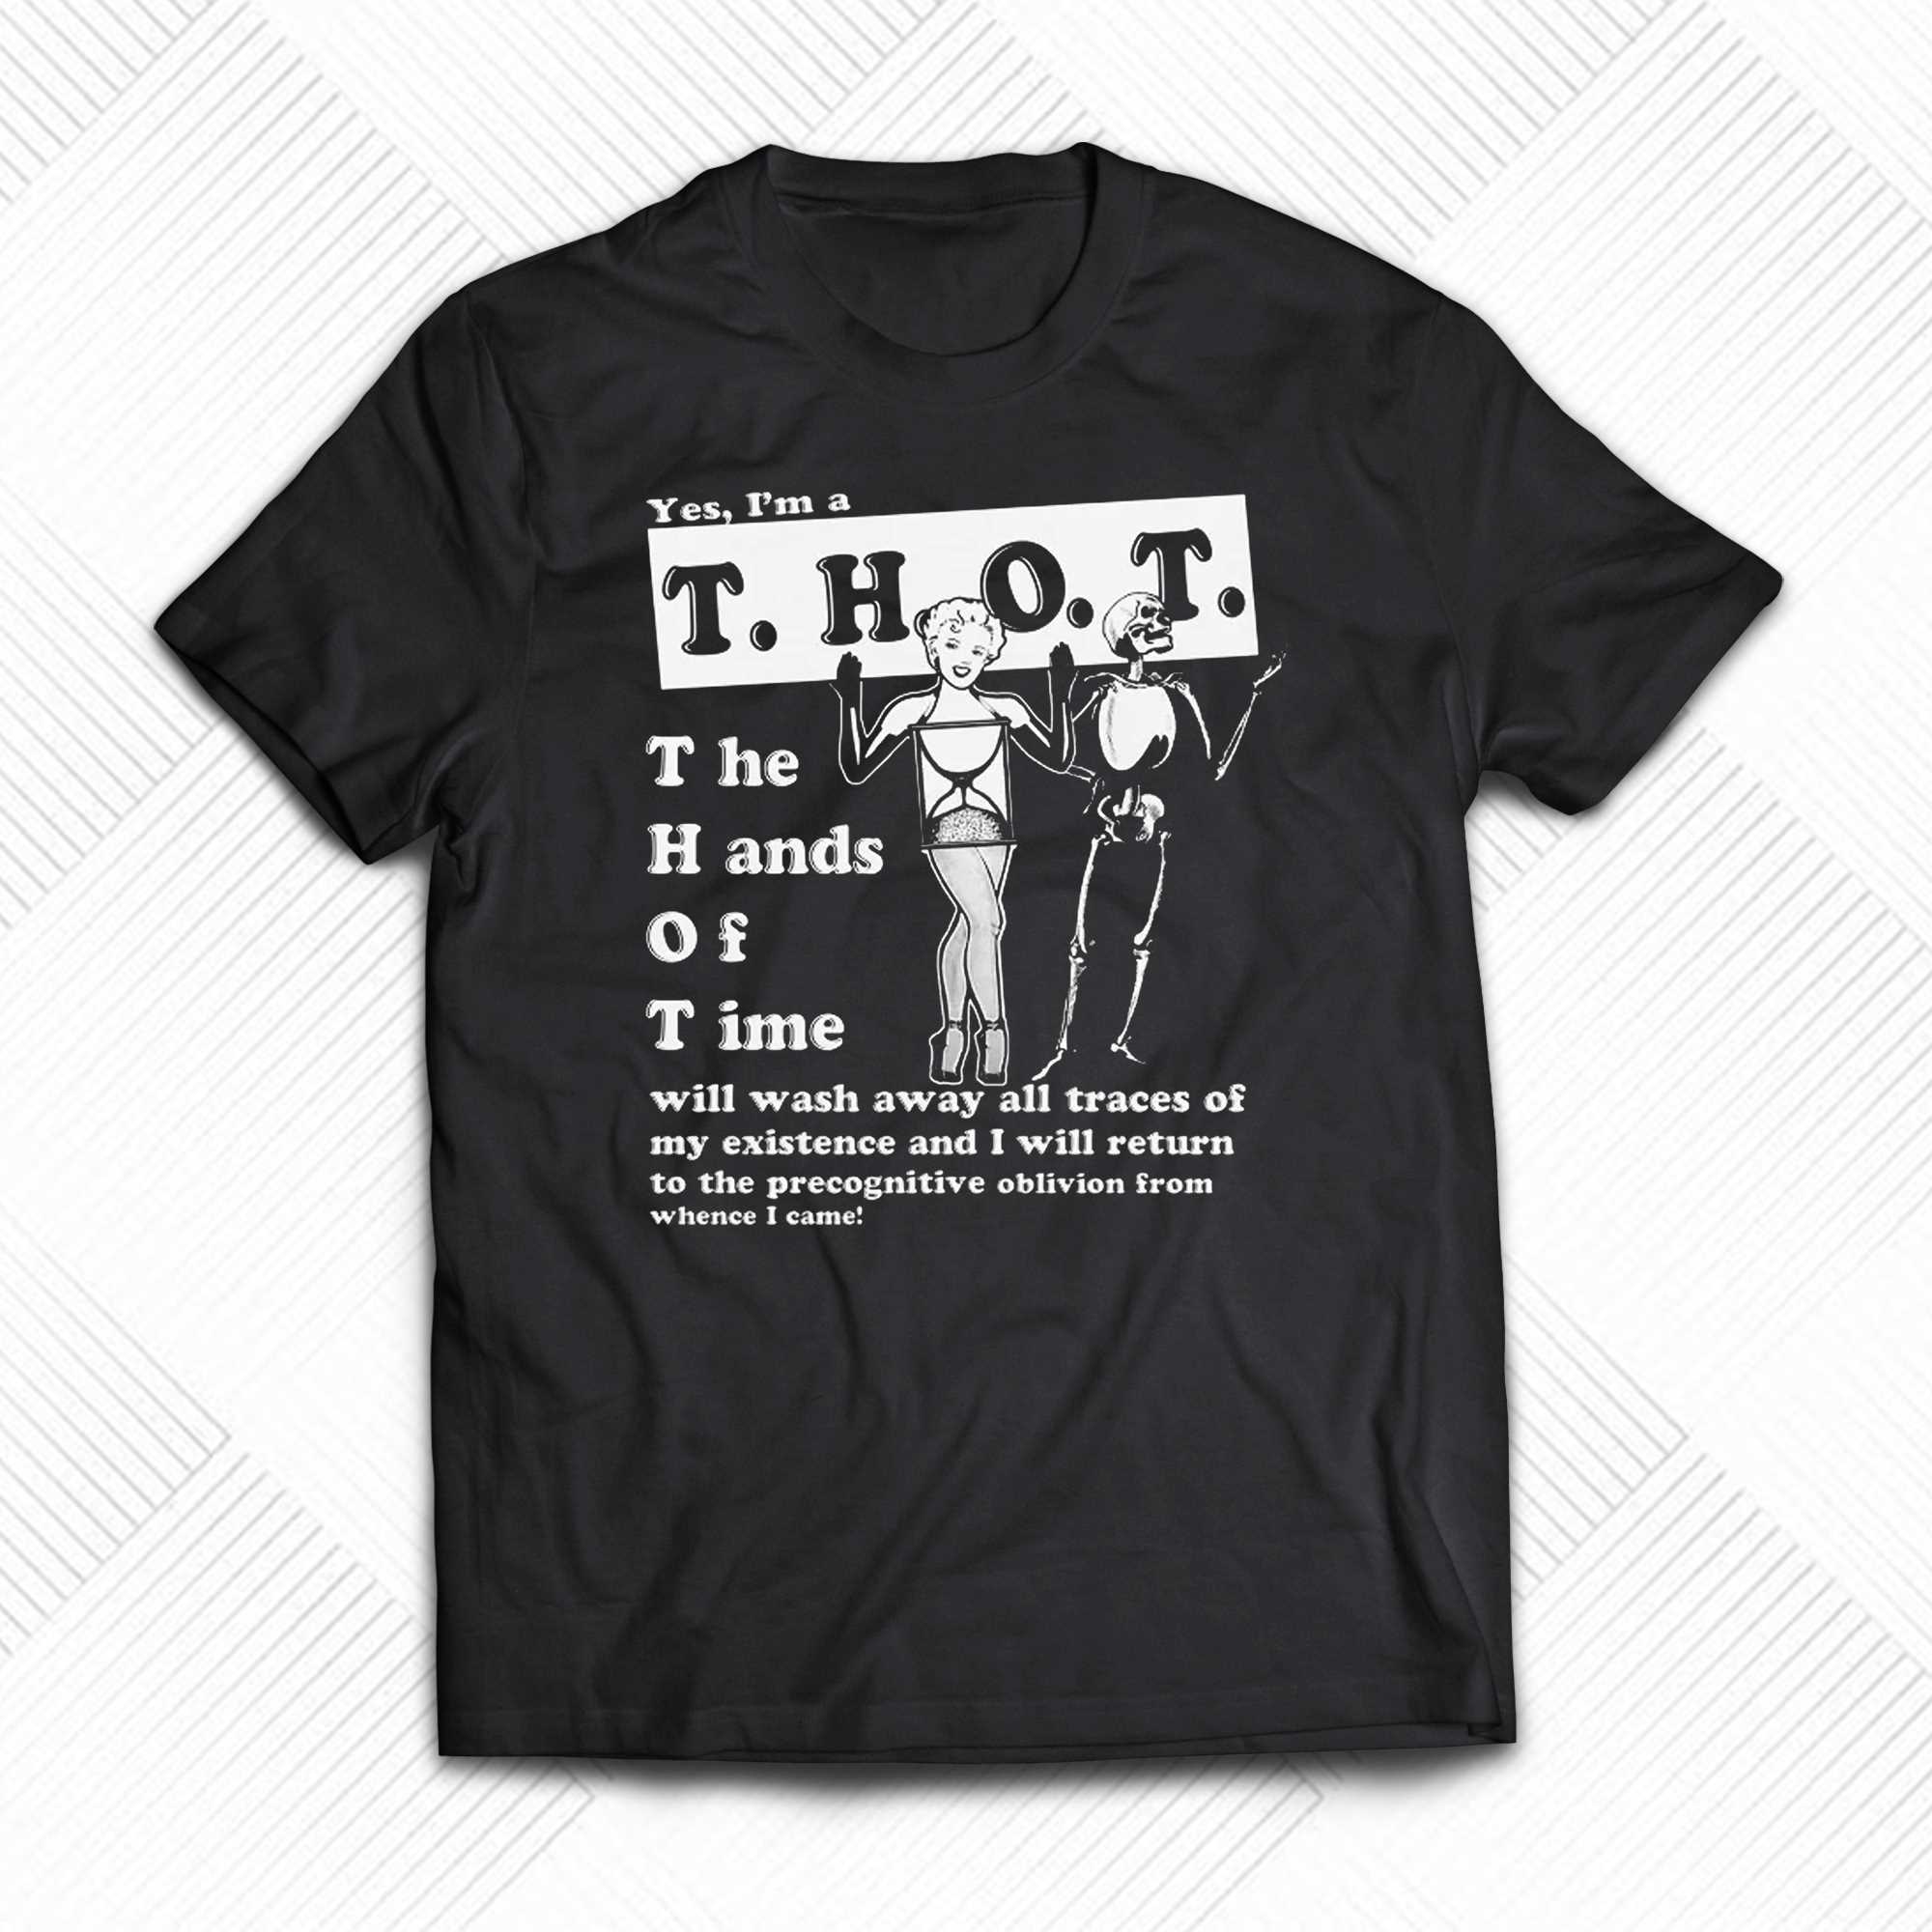 yes im a thot the hands of time t shirt 1 1